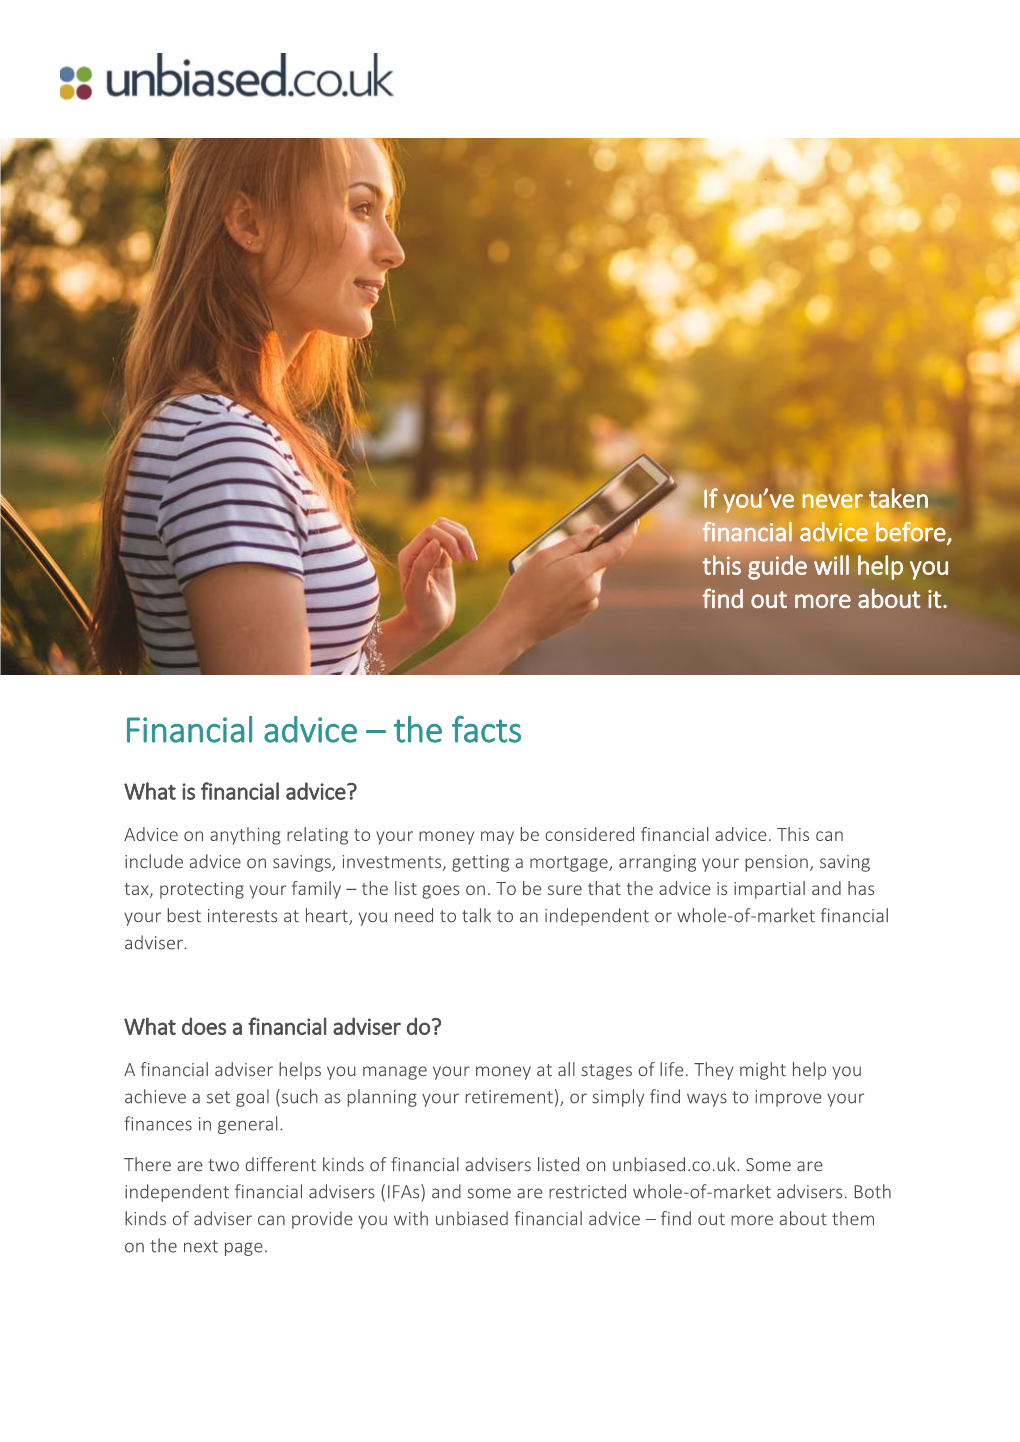 Financial Advice – the Facts